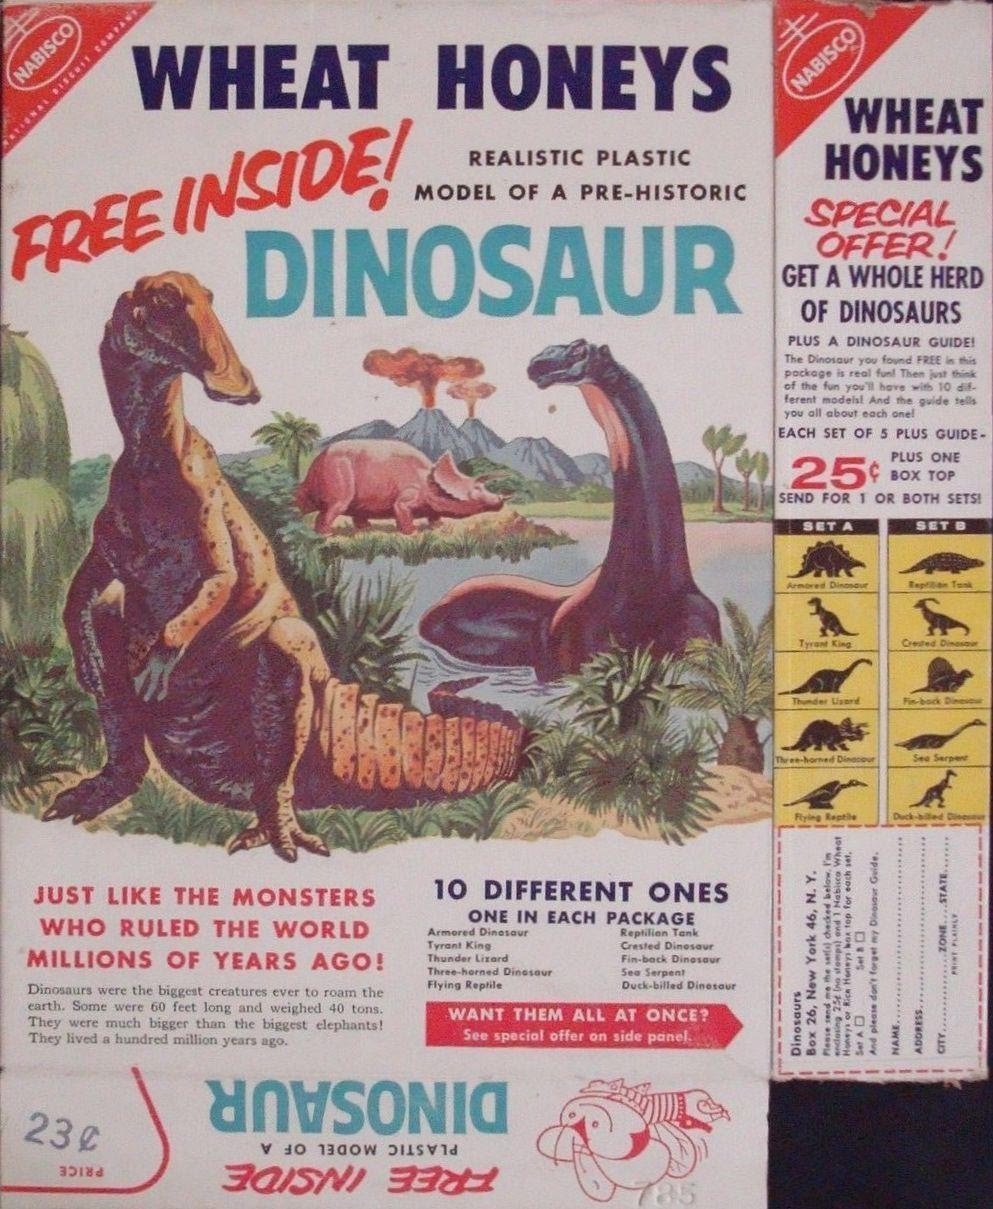 Wheat Honeys cereal box with dinosaurs from the 1960s